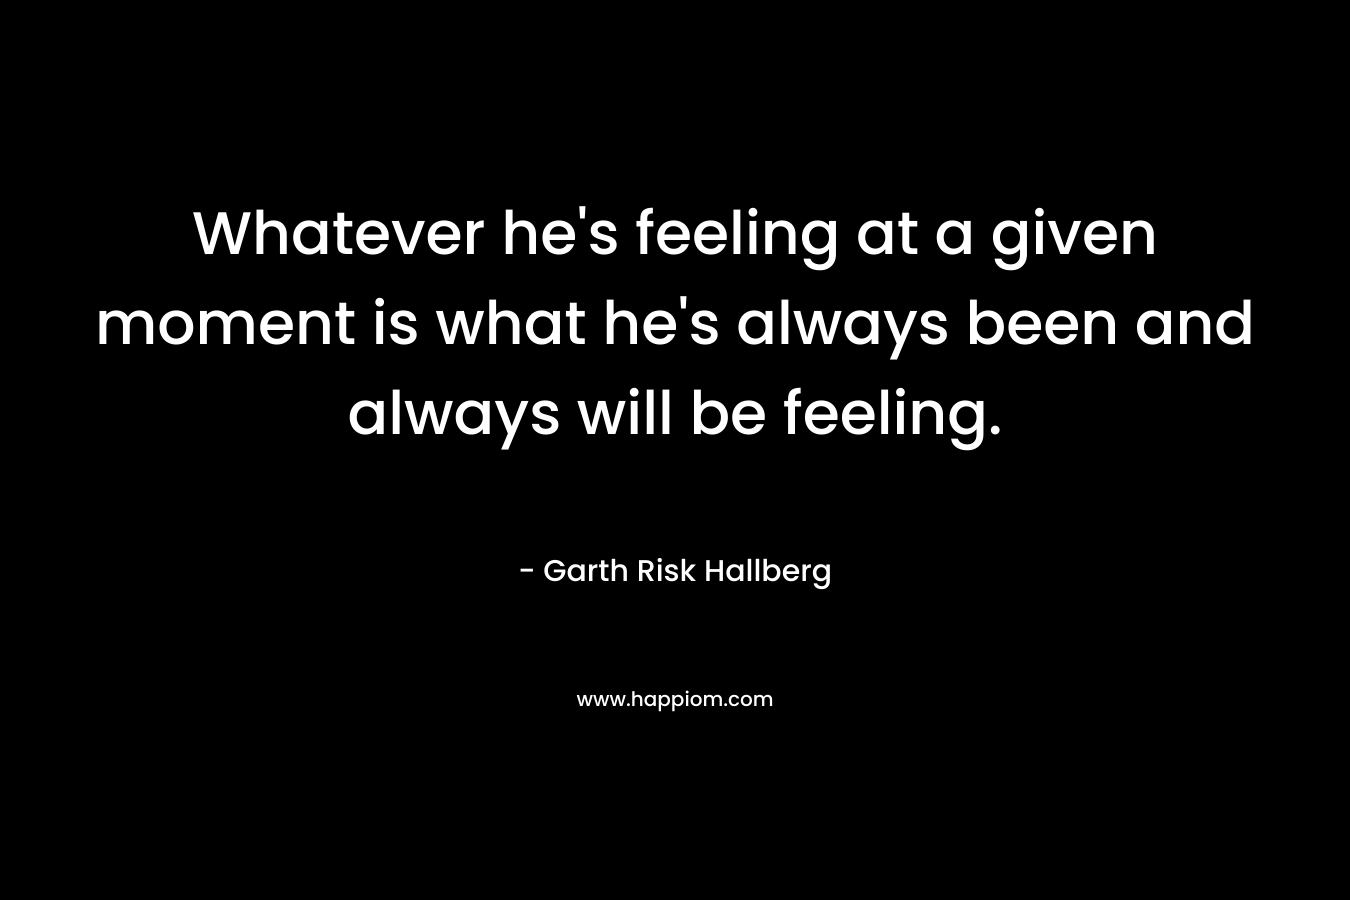 Whatever he's feeling at a given moment is what he's always been and always will be feeling.